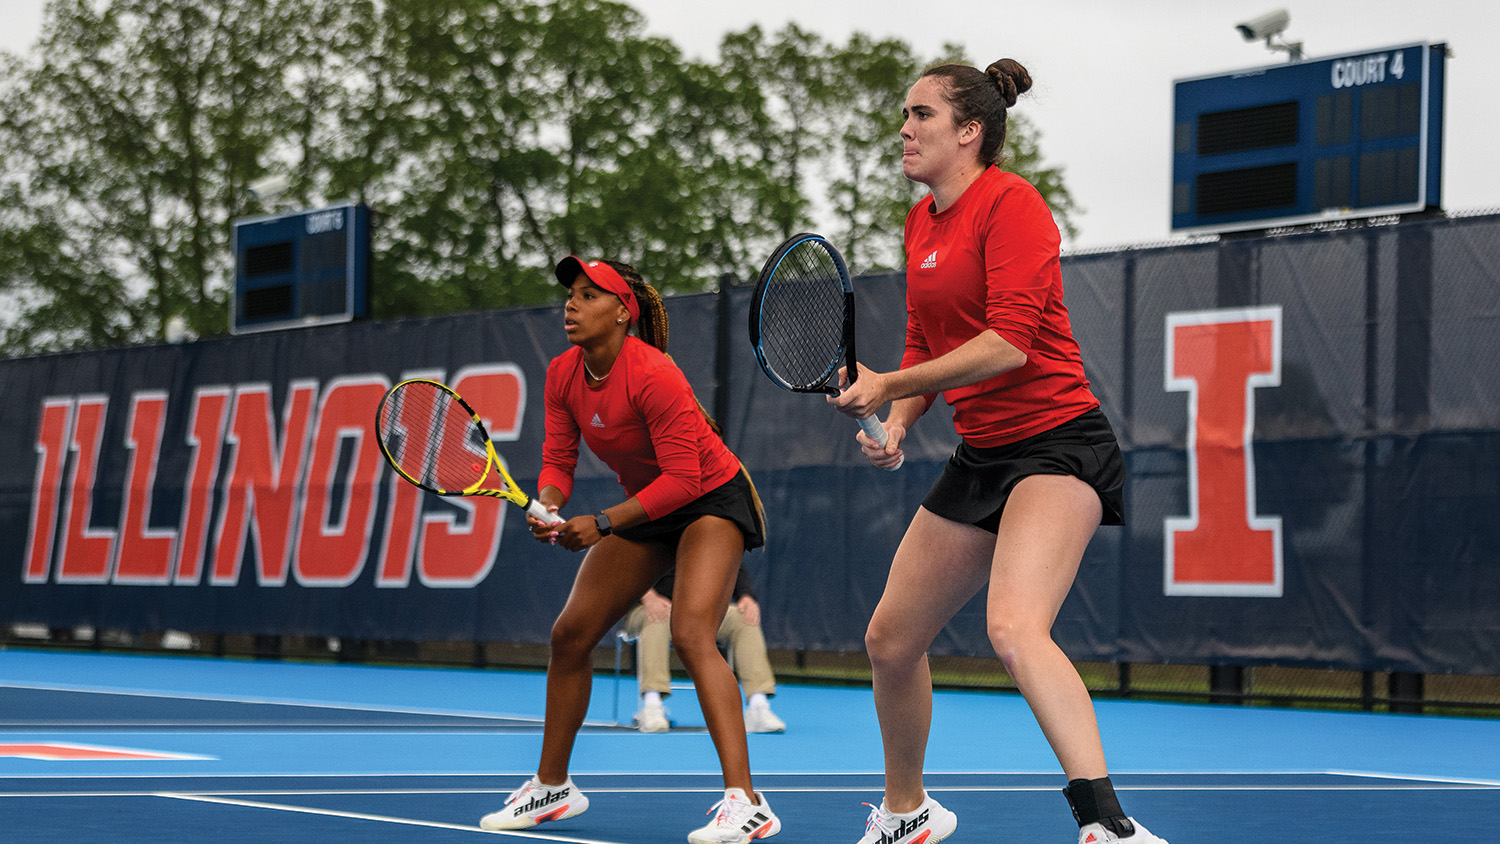 Two Wolfpack tennis players during a match.